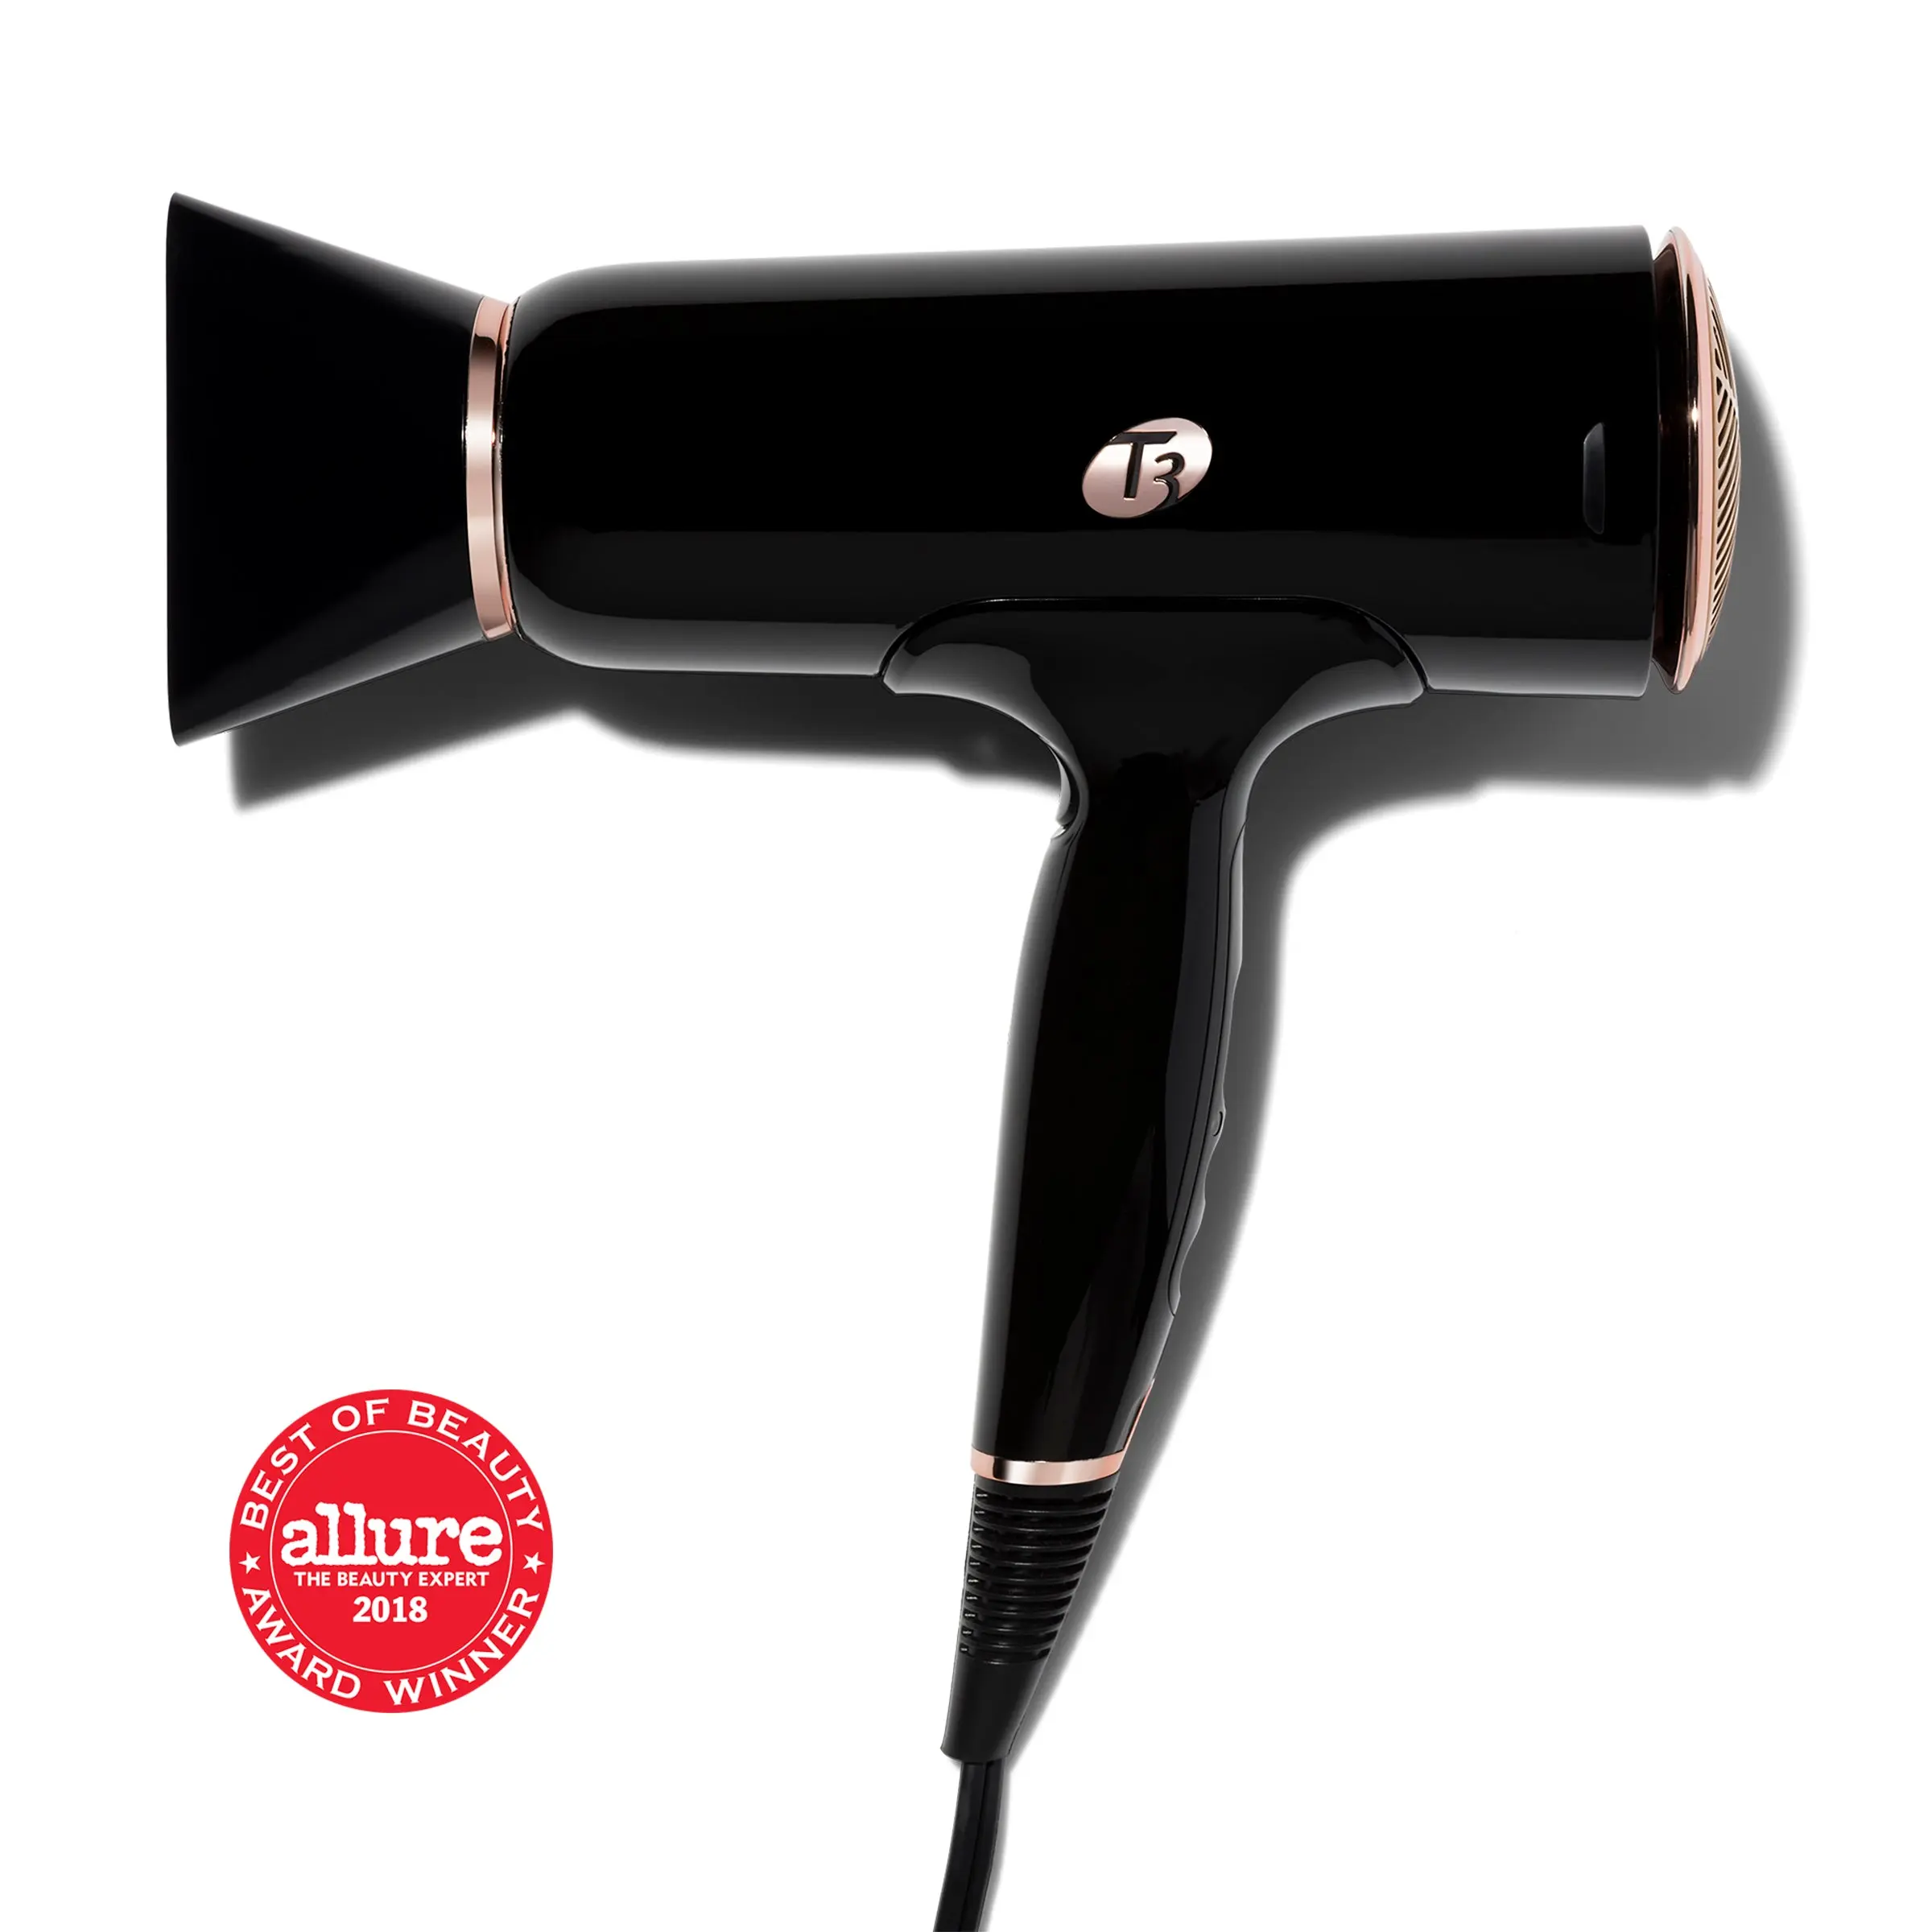 T3 cura luxe professional ionic hair dryer with auto pause sensor brush in black/rose gold